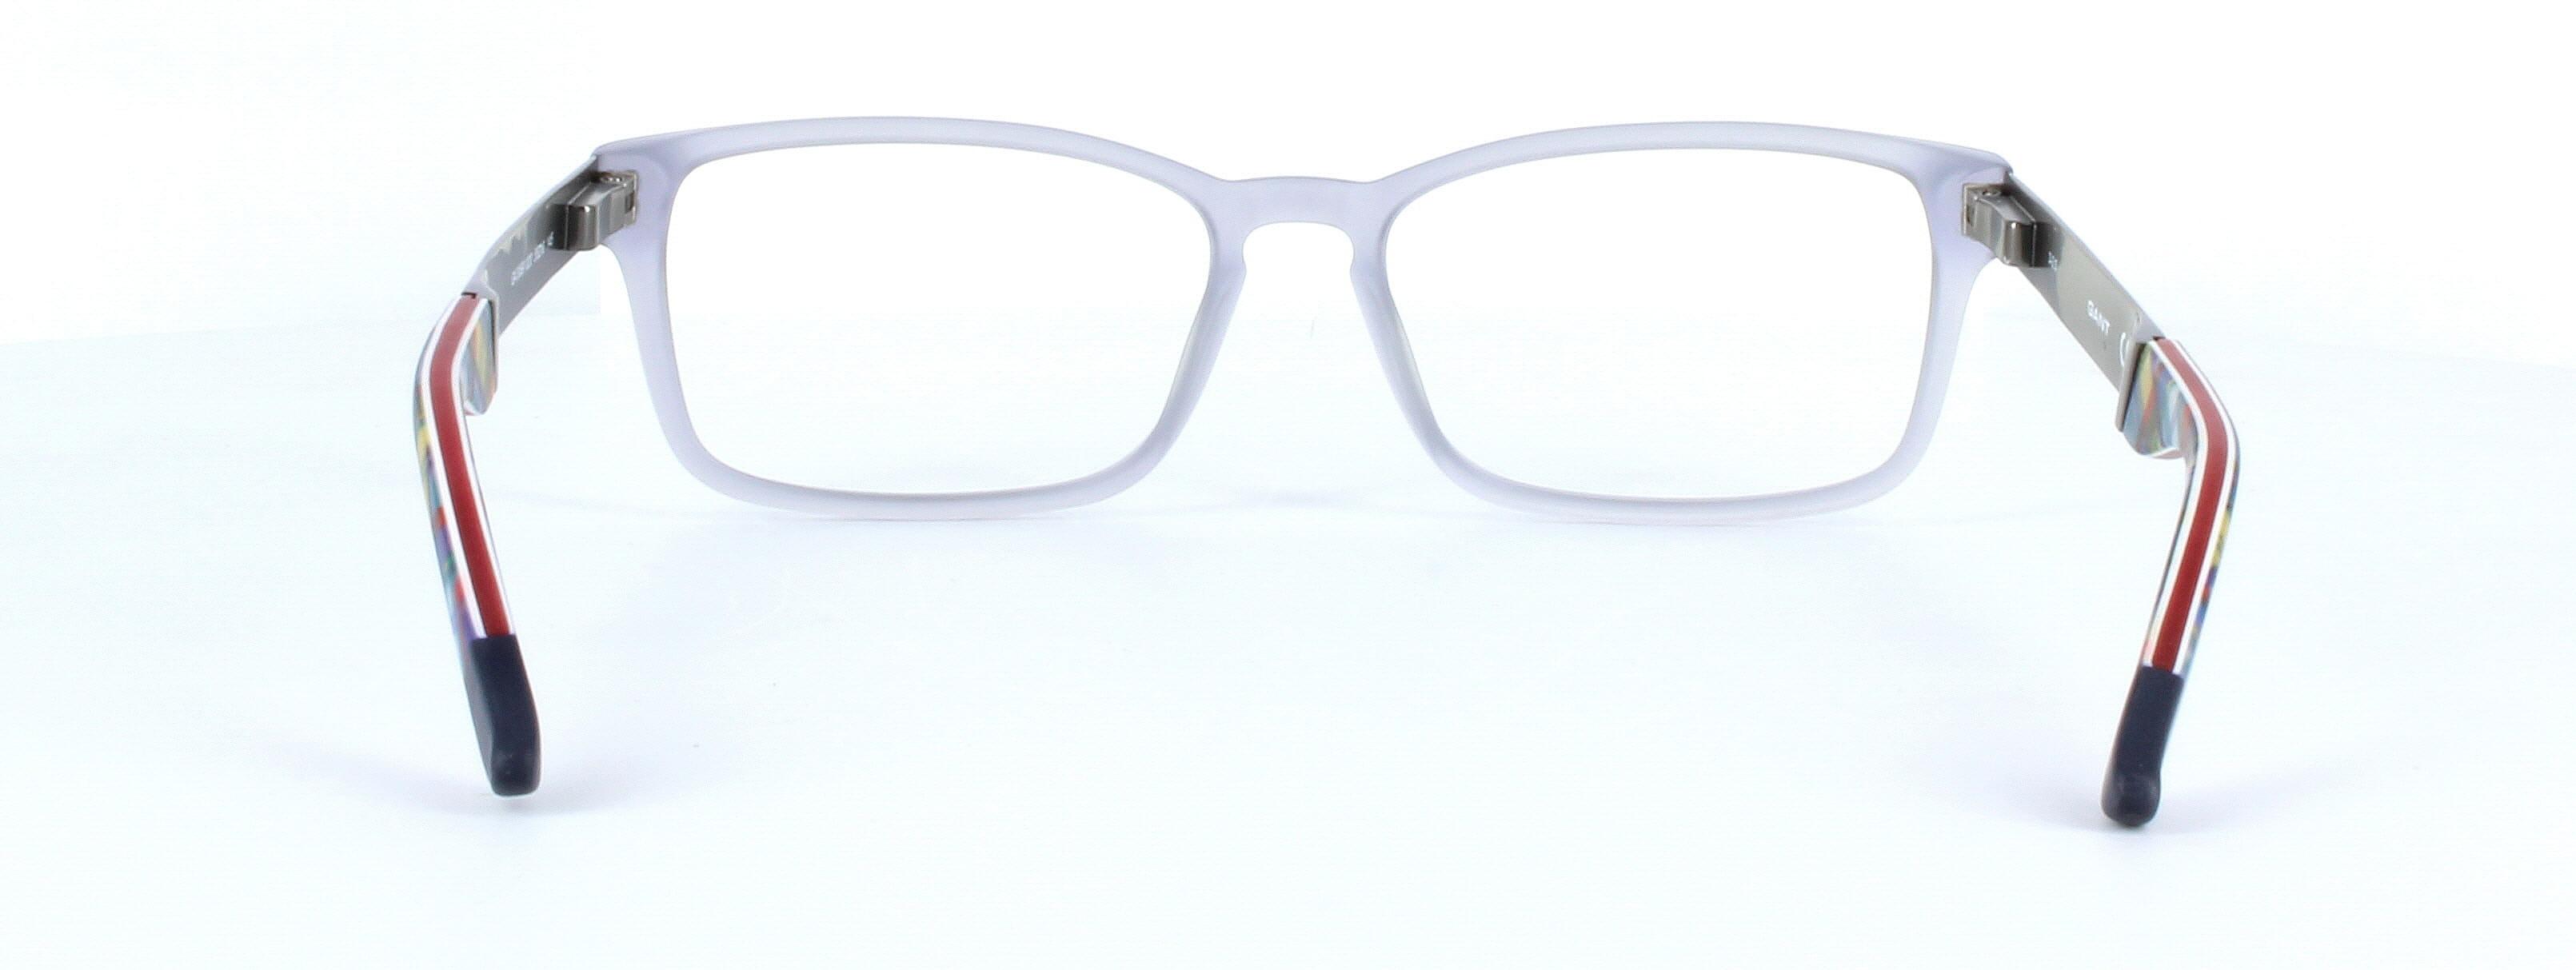 Gant 3060 020 - Unisex crystal grey acetate glasses with metal arms - image view 3